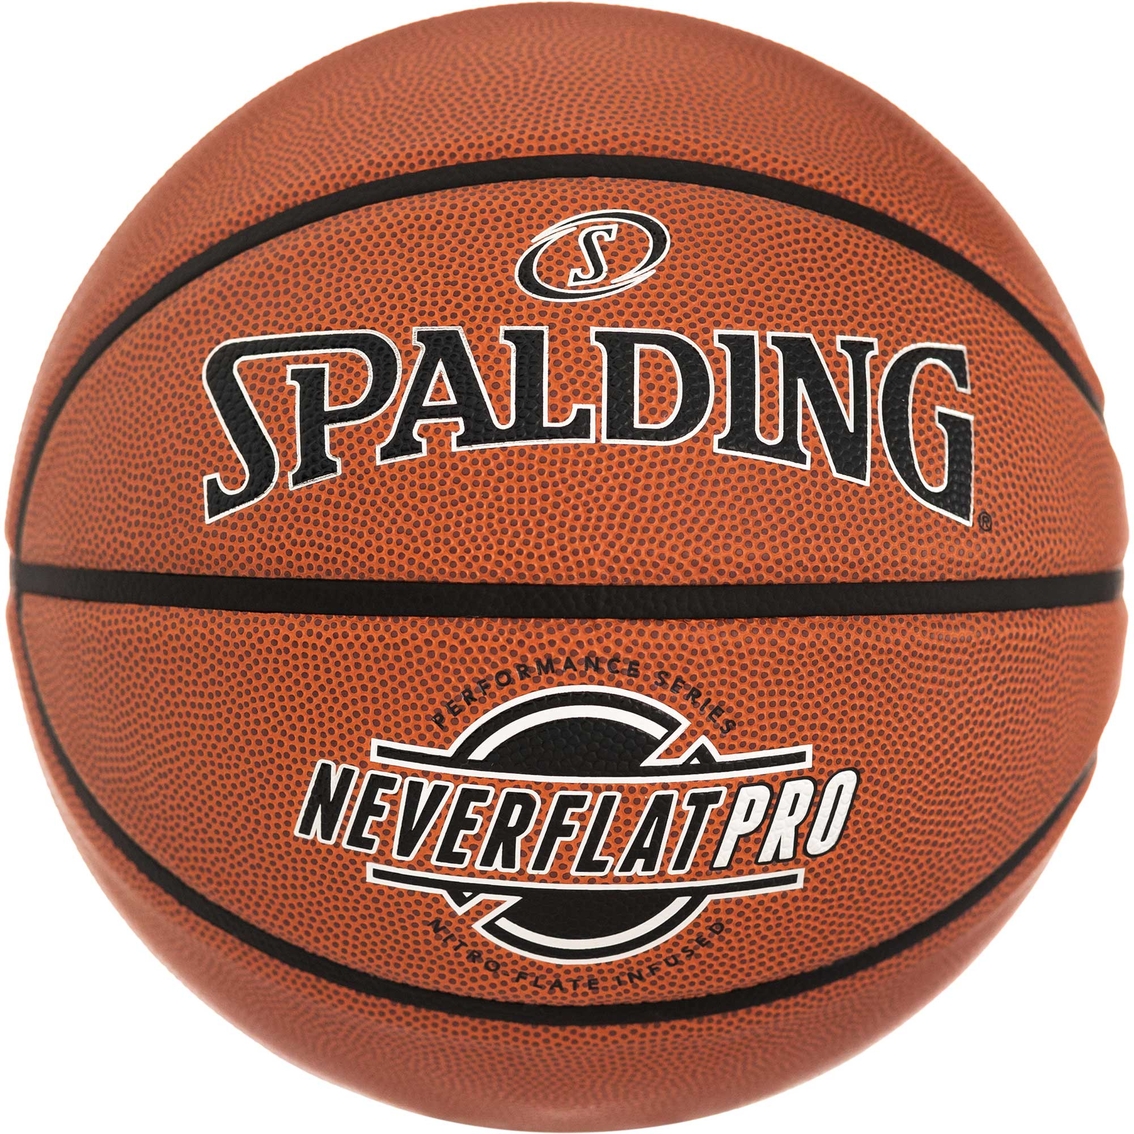 Spalding Neverflat Pro In/out Composite 29.5 In. Basketball | Baseball ...